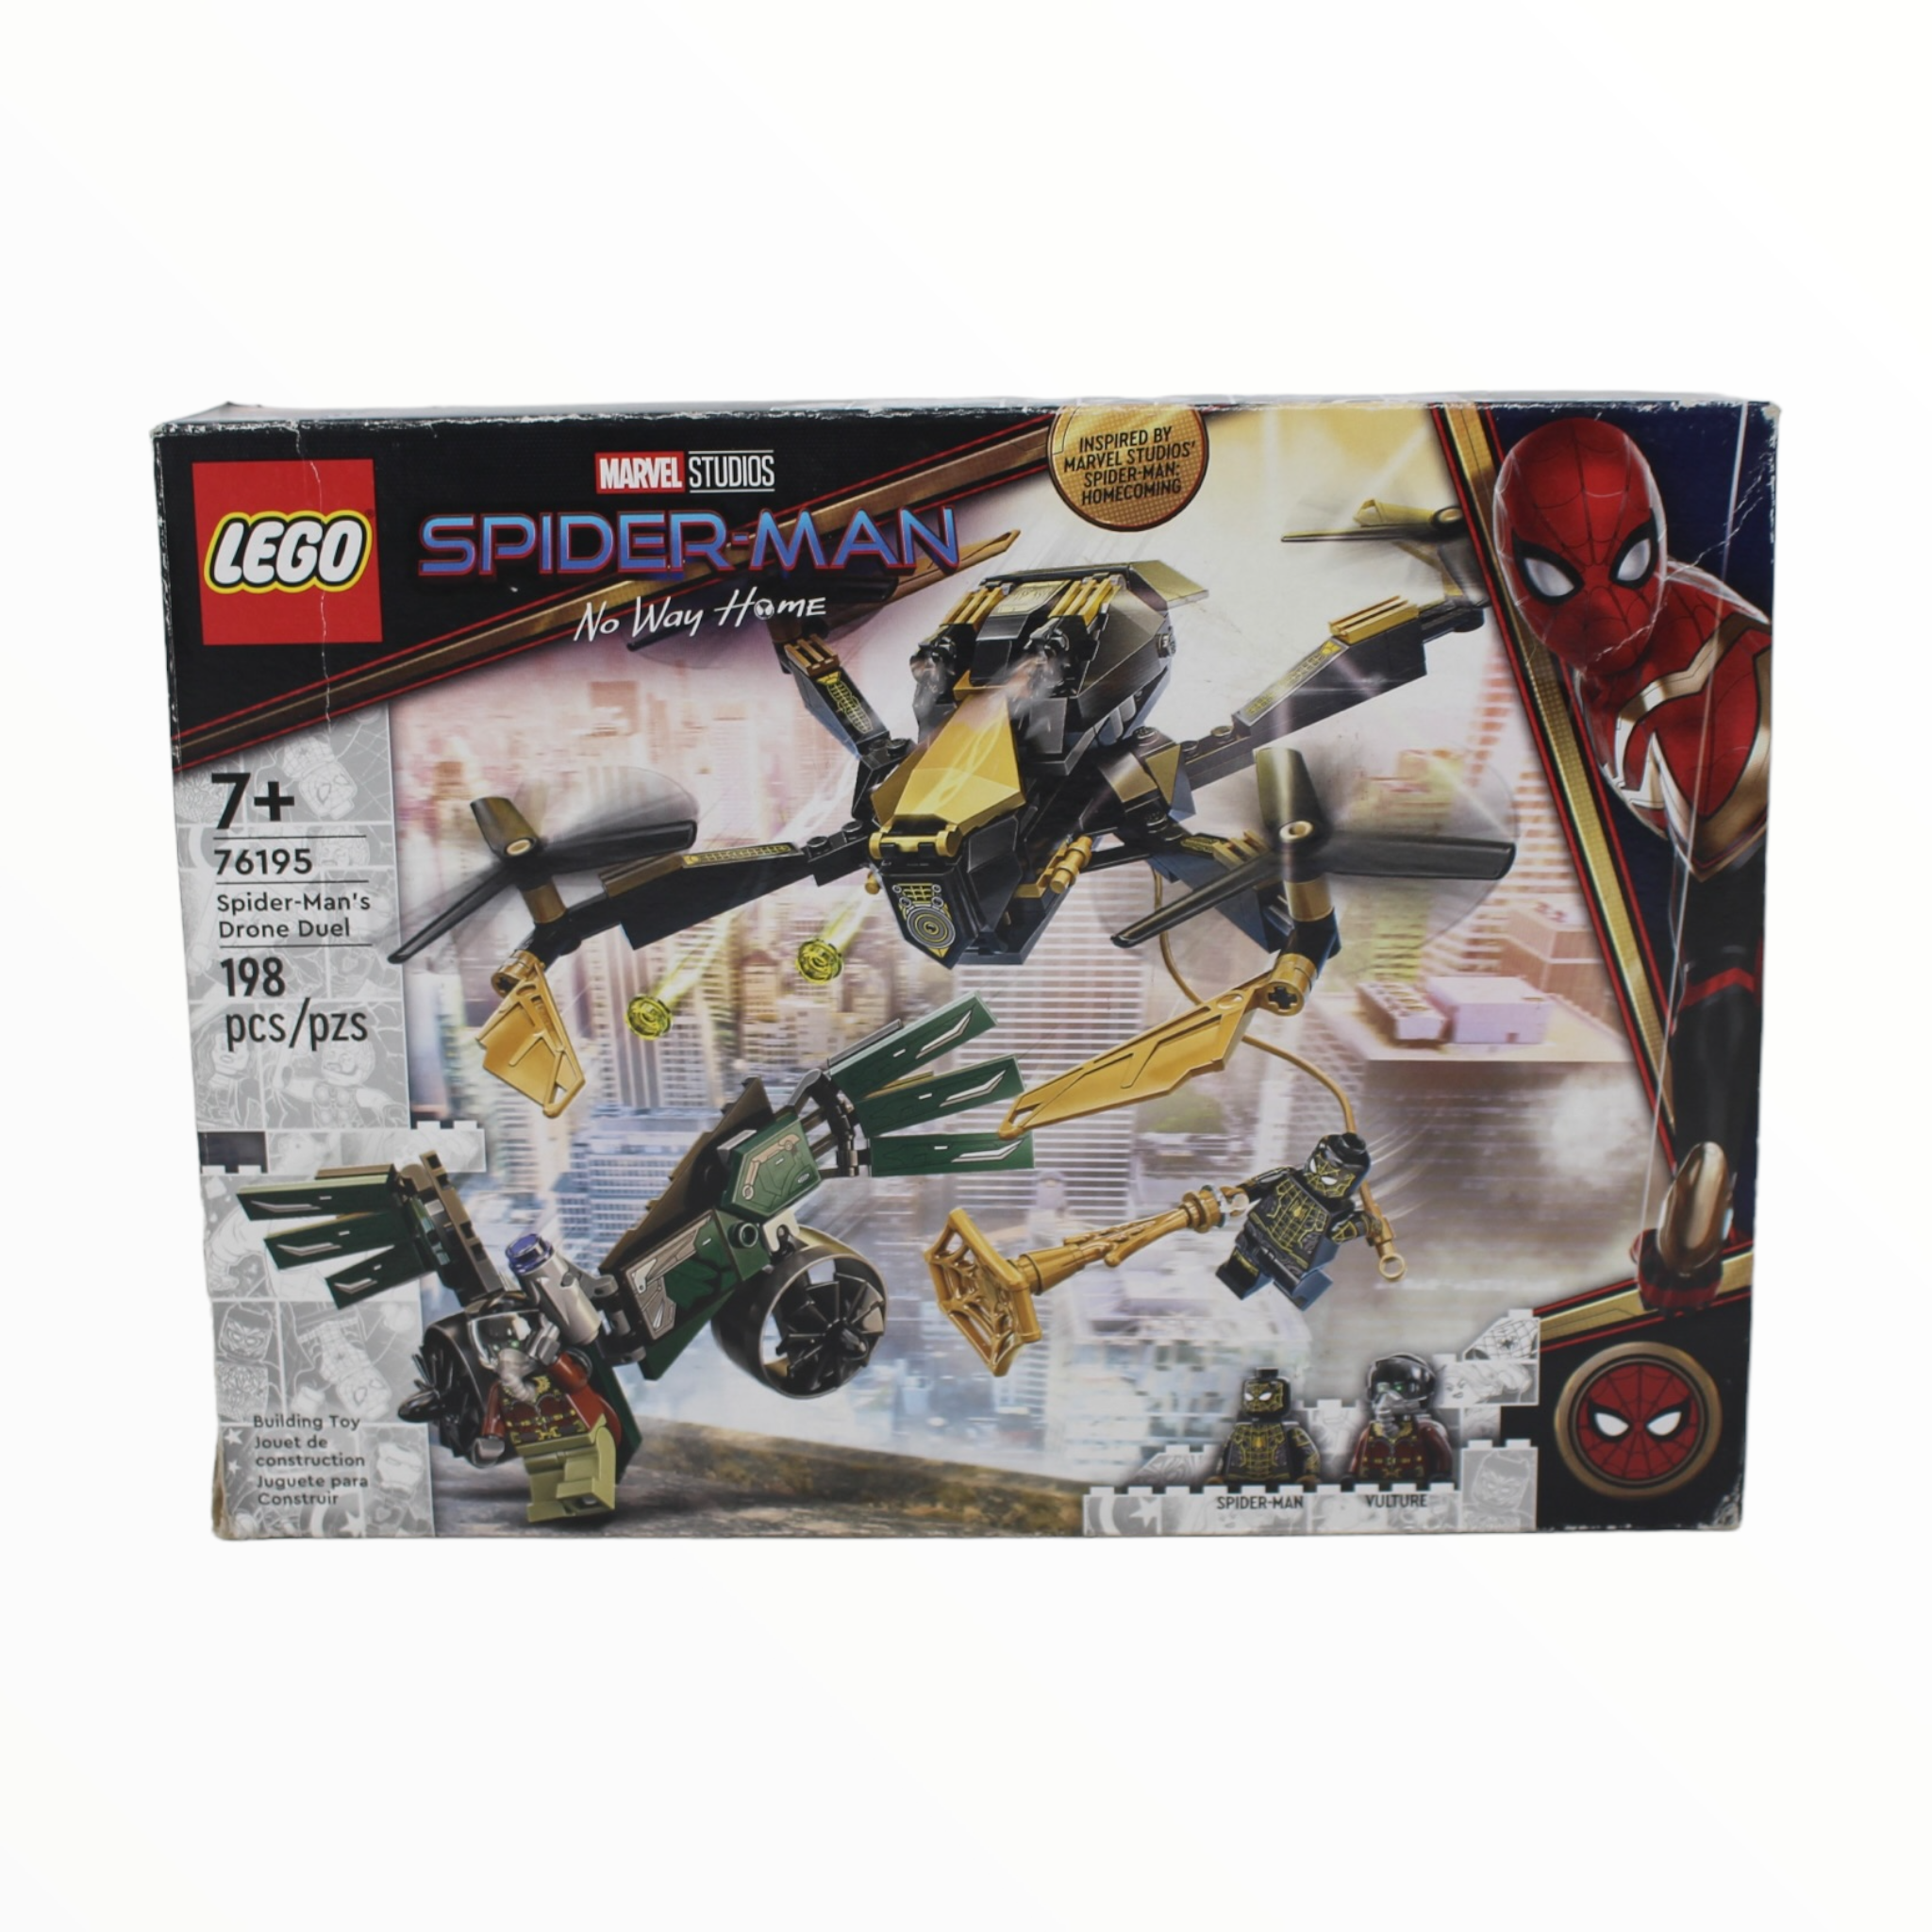 Certified Used Set 76195 Marvel Studios Spider-Man’s Drone Duel